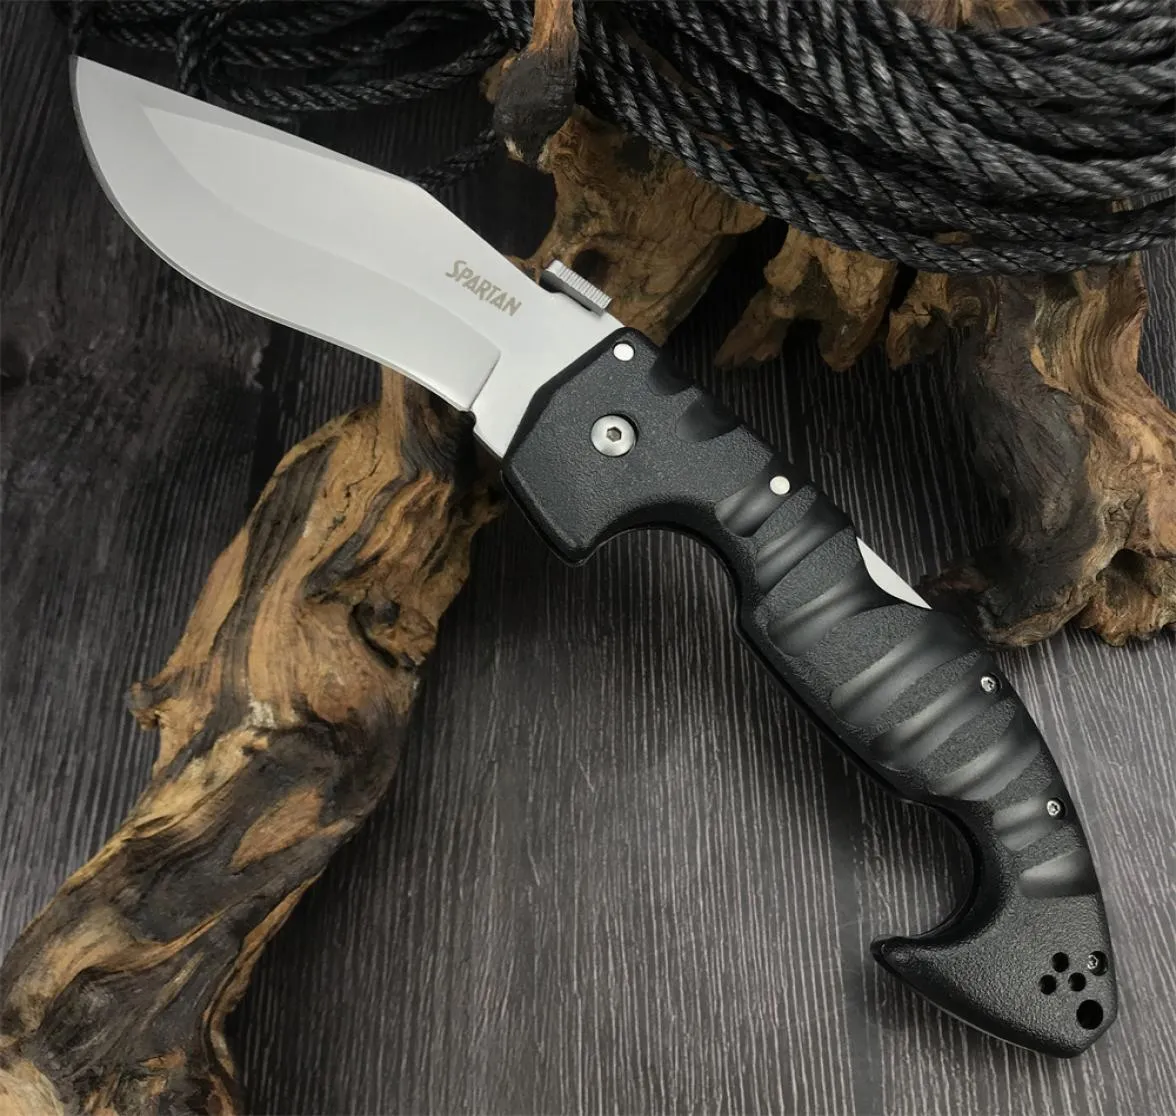 Cold Steel Spartan 21ST AUS10A Pocket Folding Knife GrivEx Handles Tactical Kukri Hunting Military Combat Knives9382779